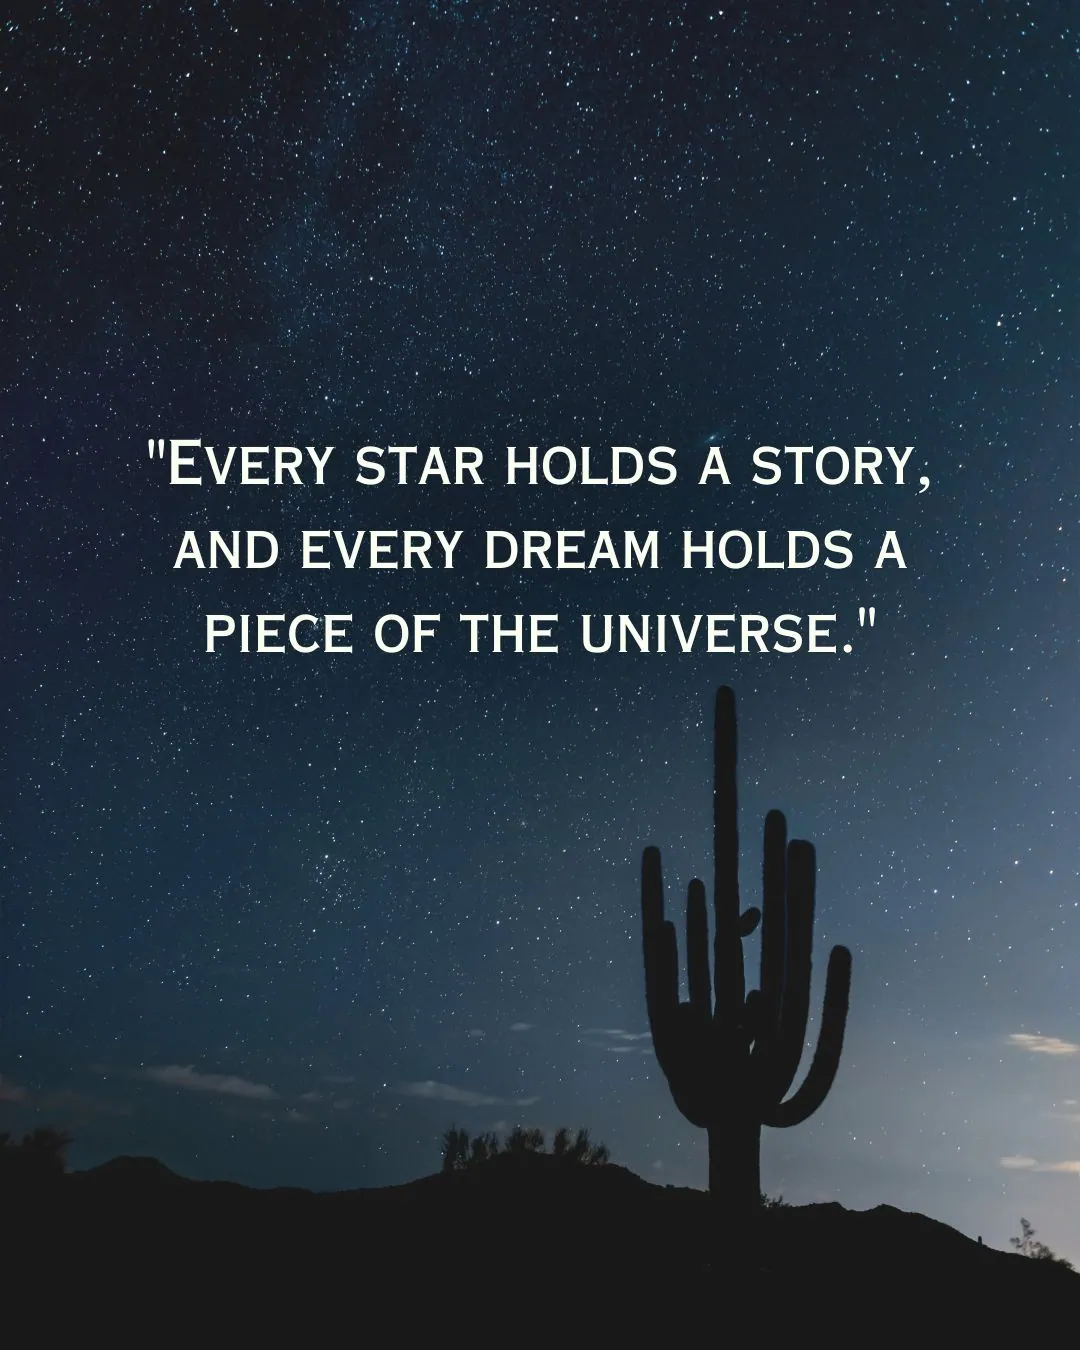 Meaningful Night Sky Quotes for Instagram Image 6